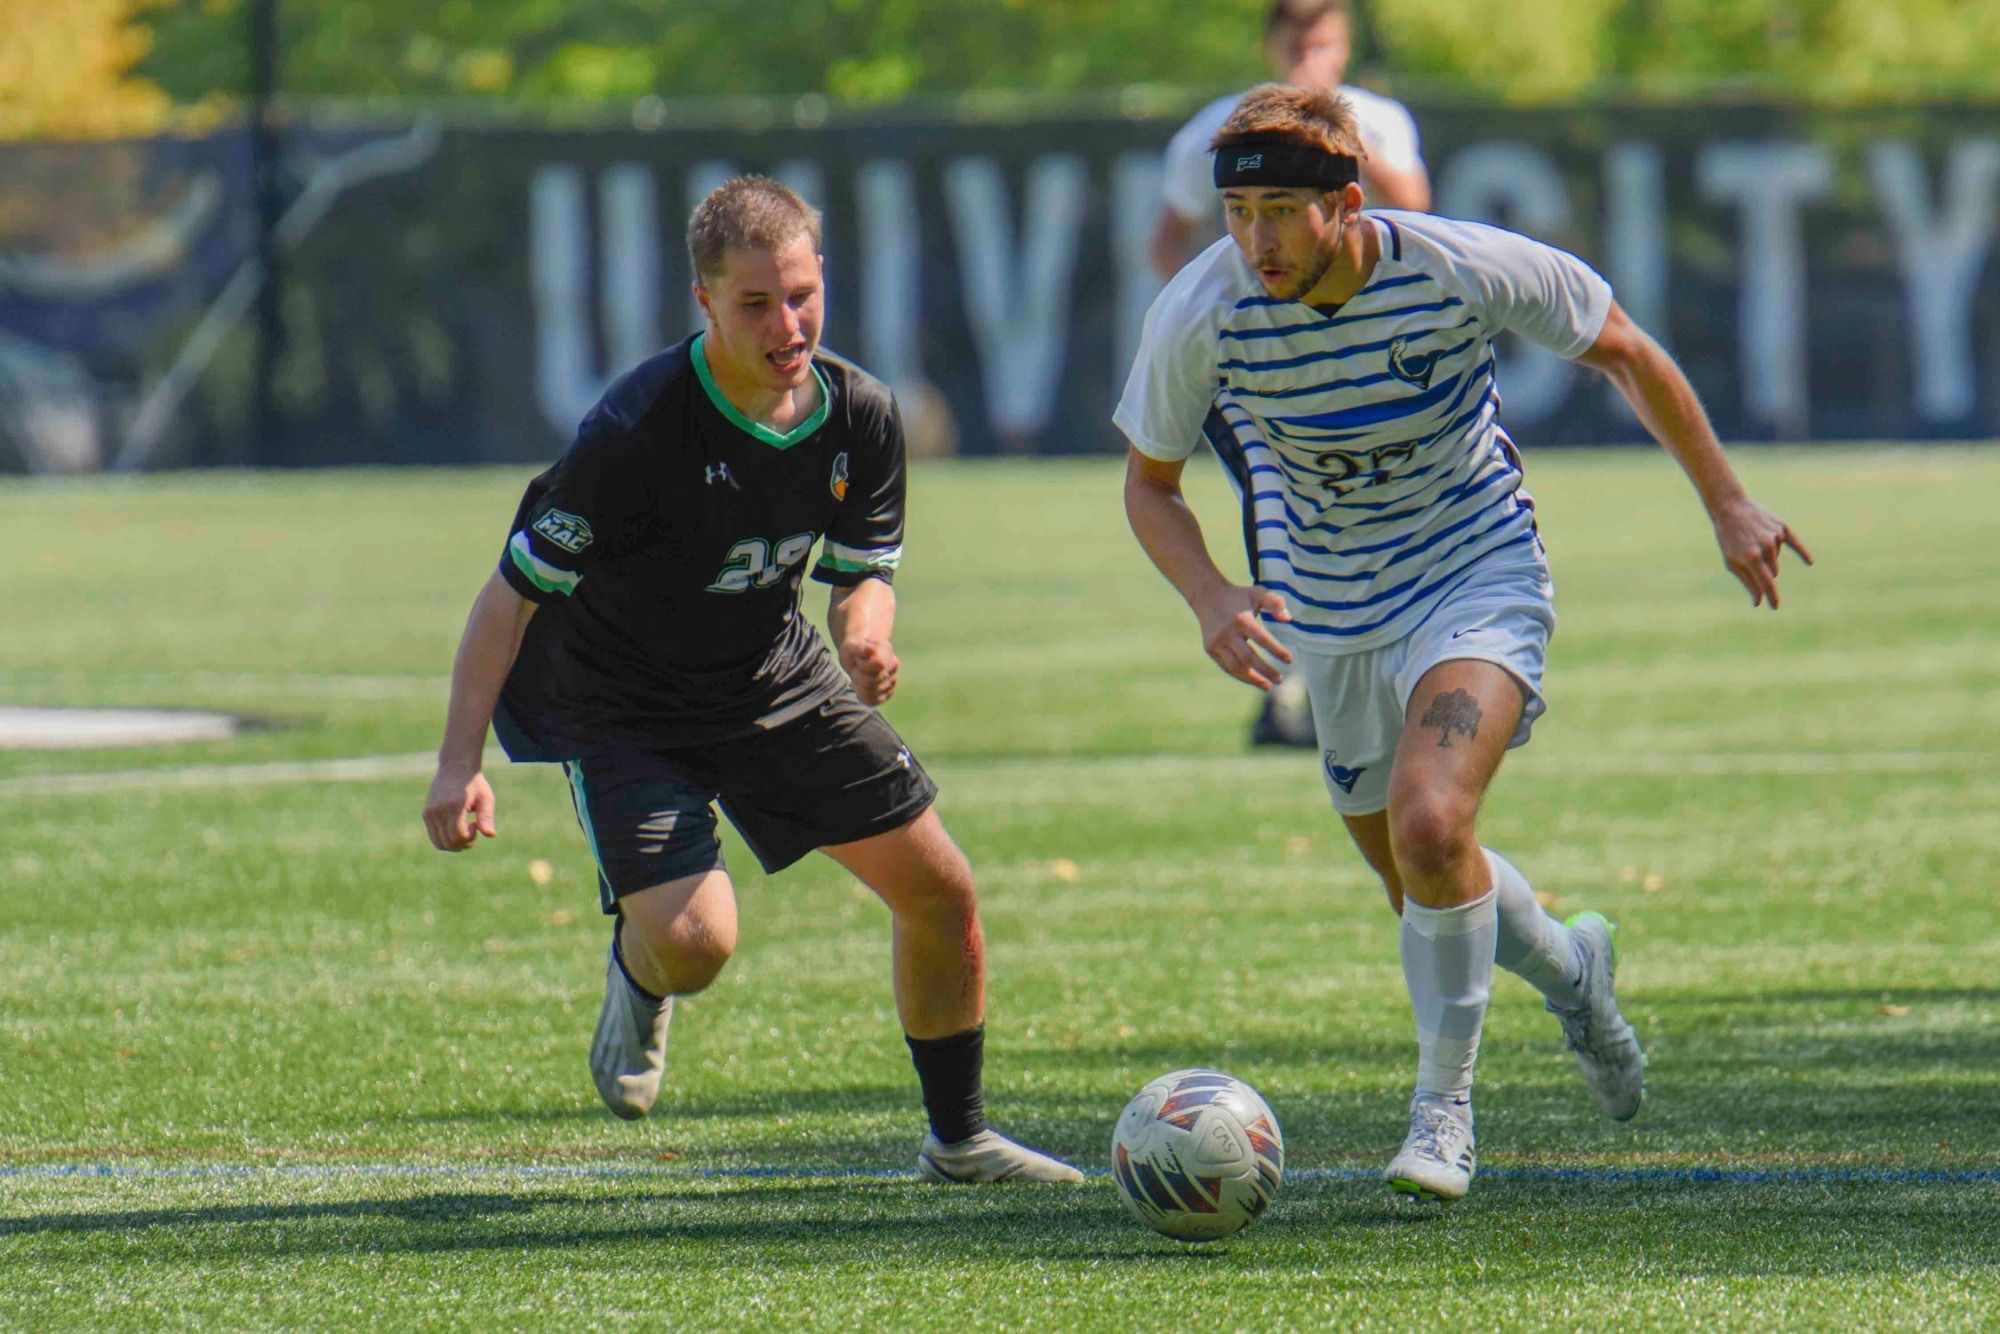 In an afternoon contest on Edith Robb Dixon field, Ethan Emery races up the field in Cabrini's home white jersey's with blue stripes as a Delaware Valley defender in black runs with him